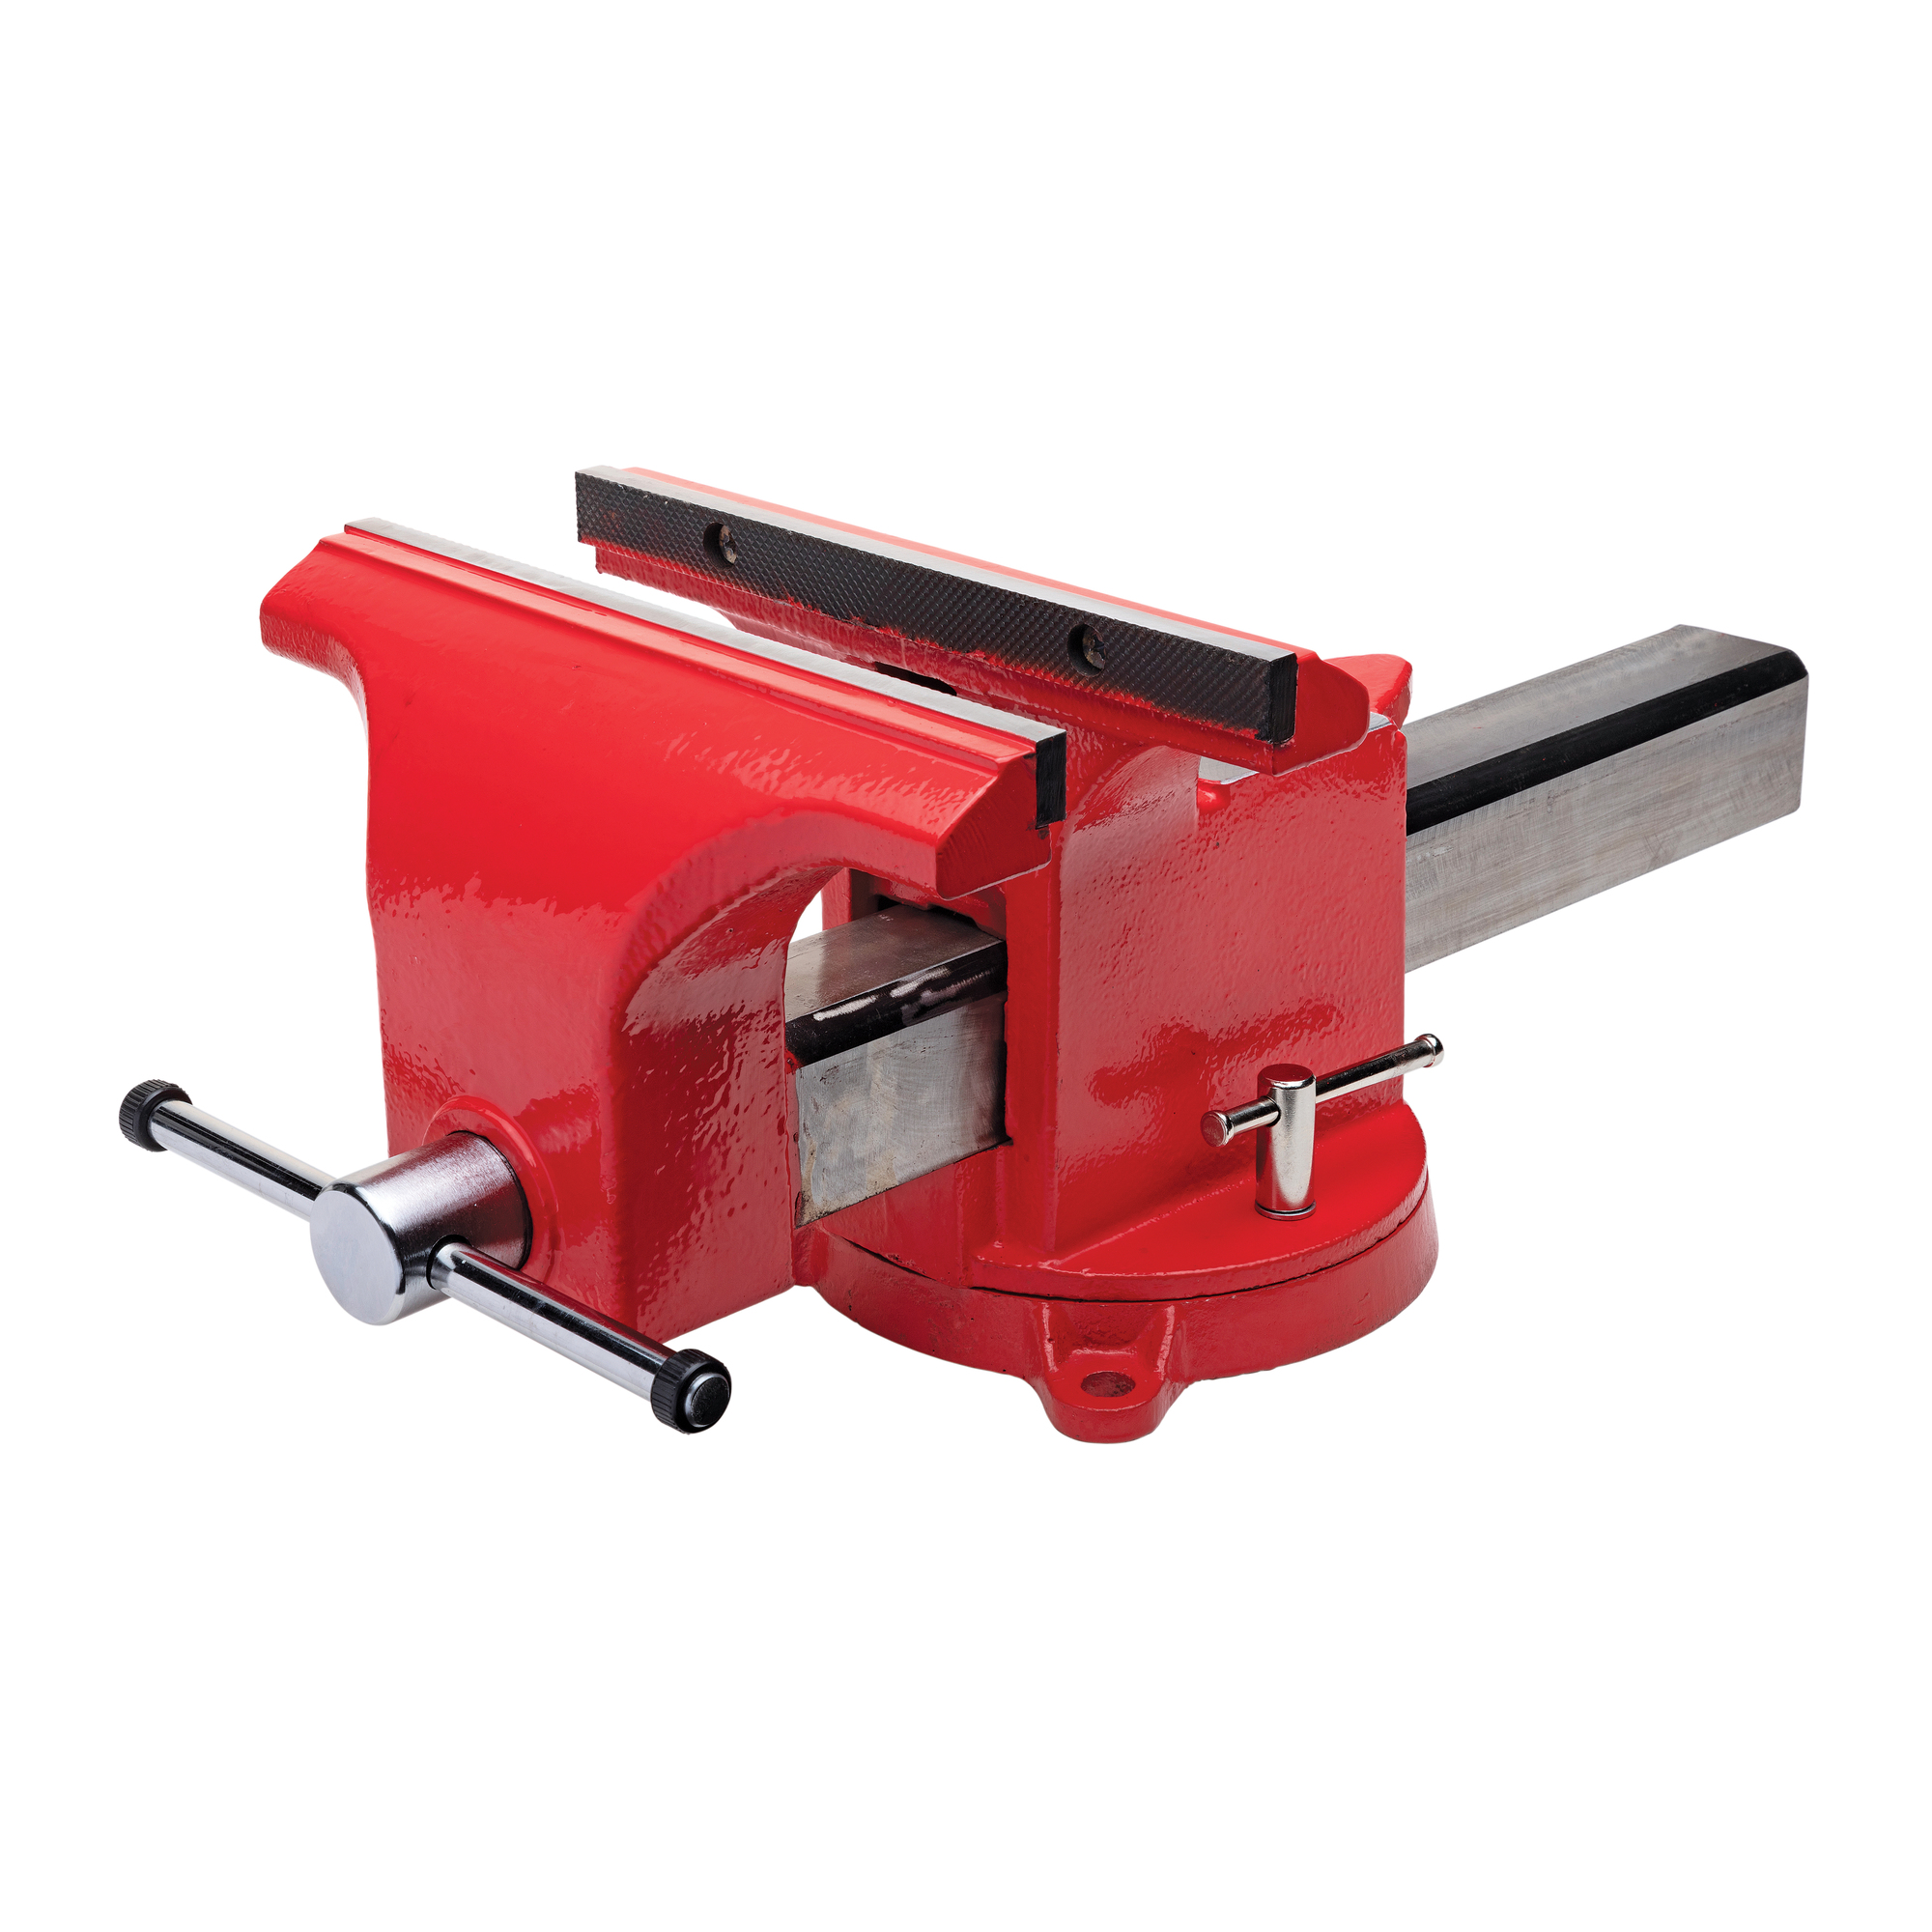 Yost Vises, 12Inch All Steel Bench Vise, Jaw Width 12 in, Jaw Capacity 12 in, Material Steel, Model 912-AS -  56486